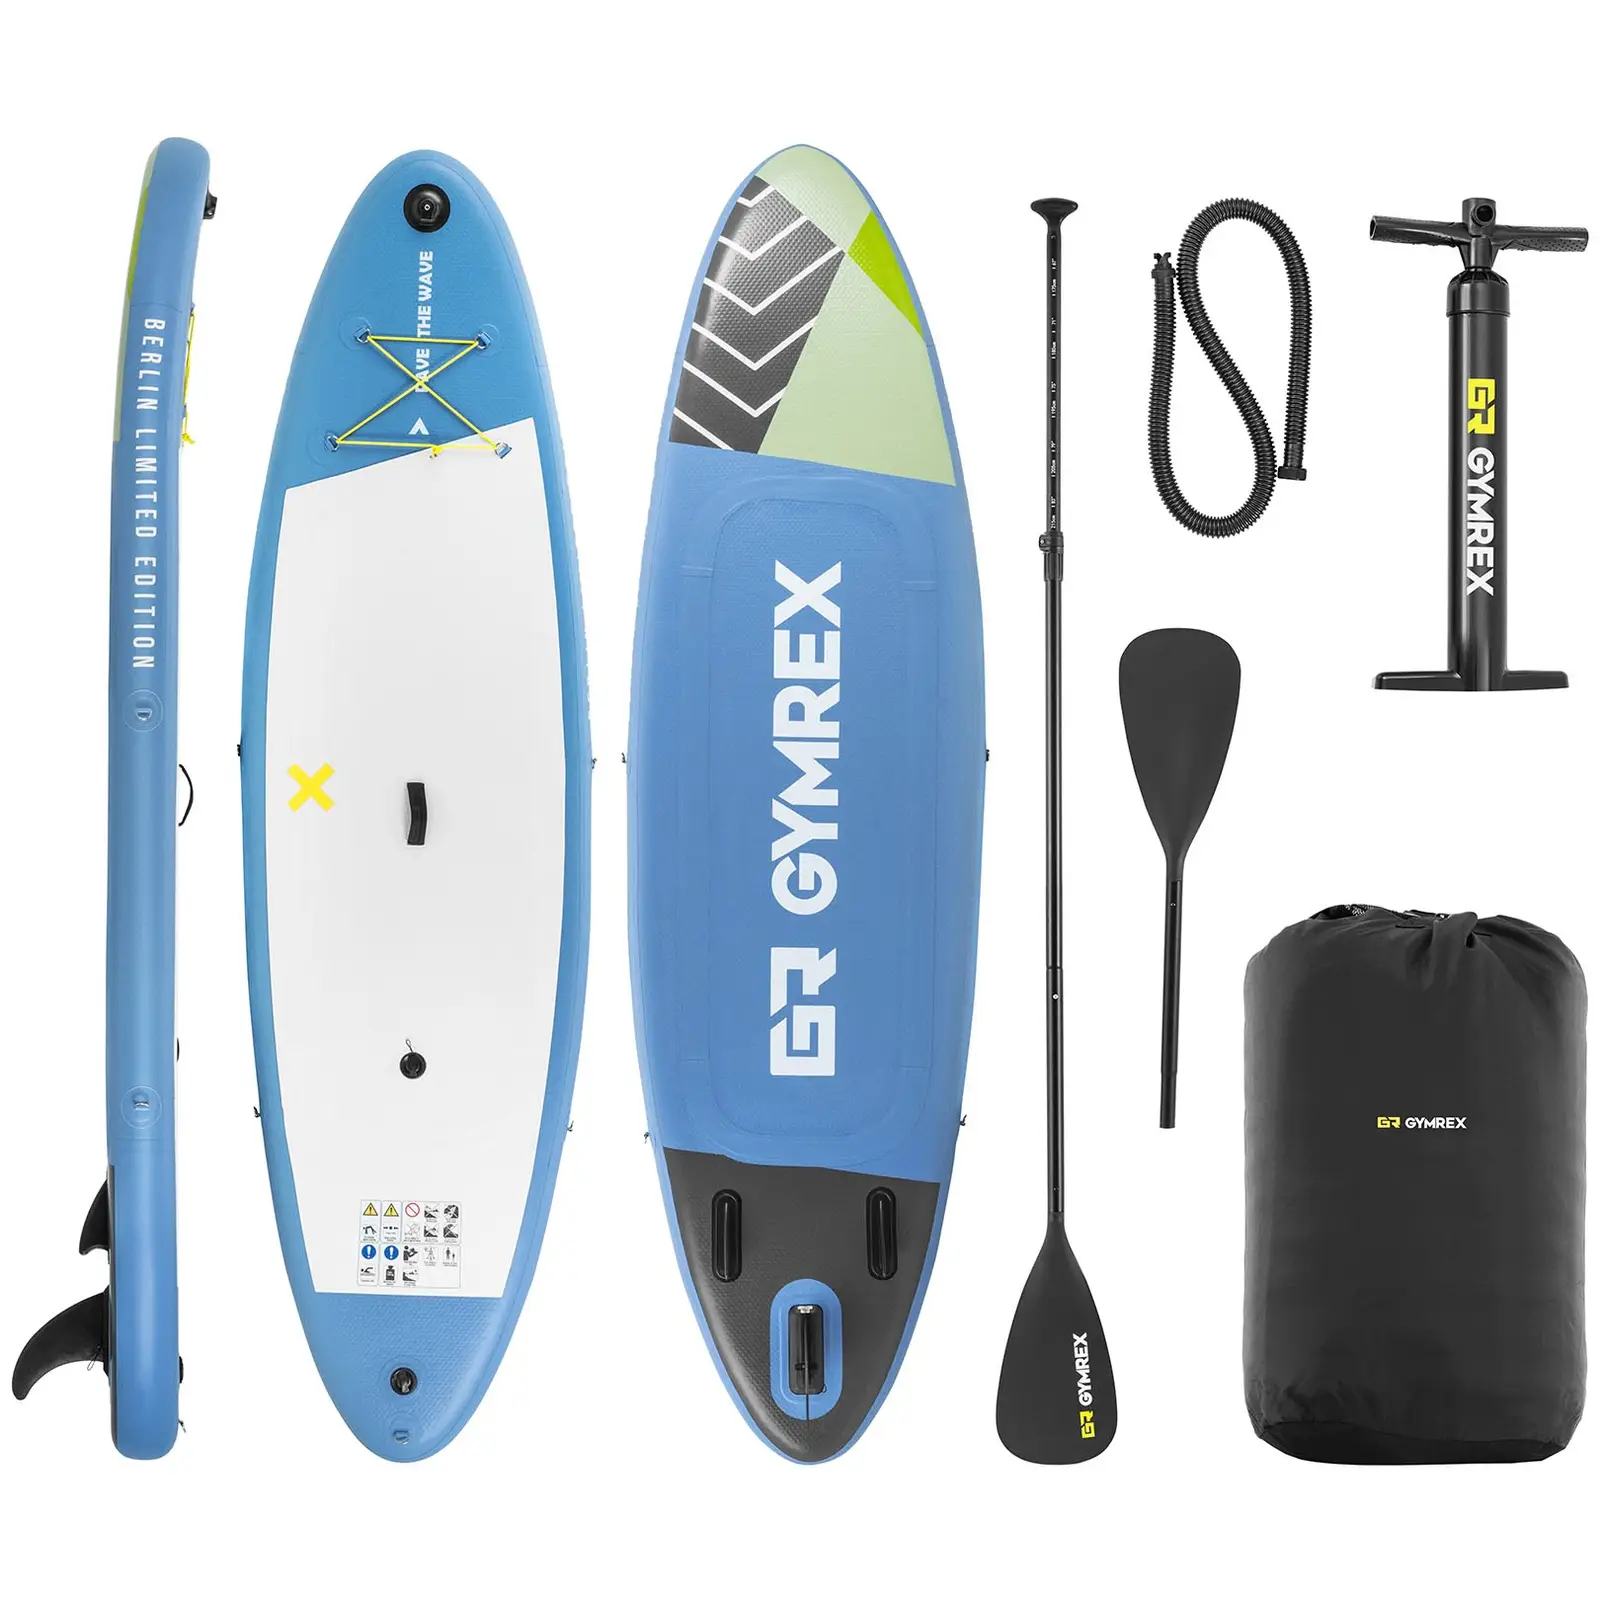 Stand up paddle gonflable - 105 kg - noir - double chambre - 302 x 81 x 38 cm